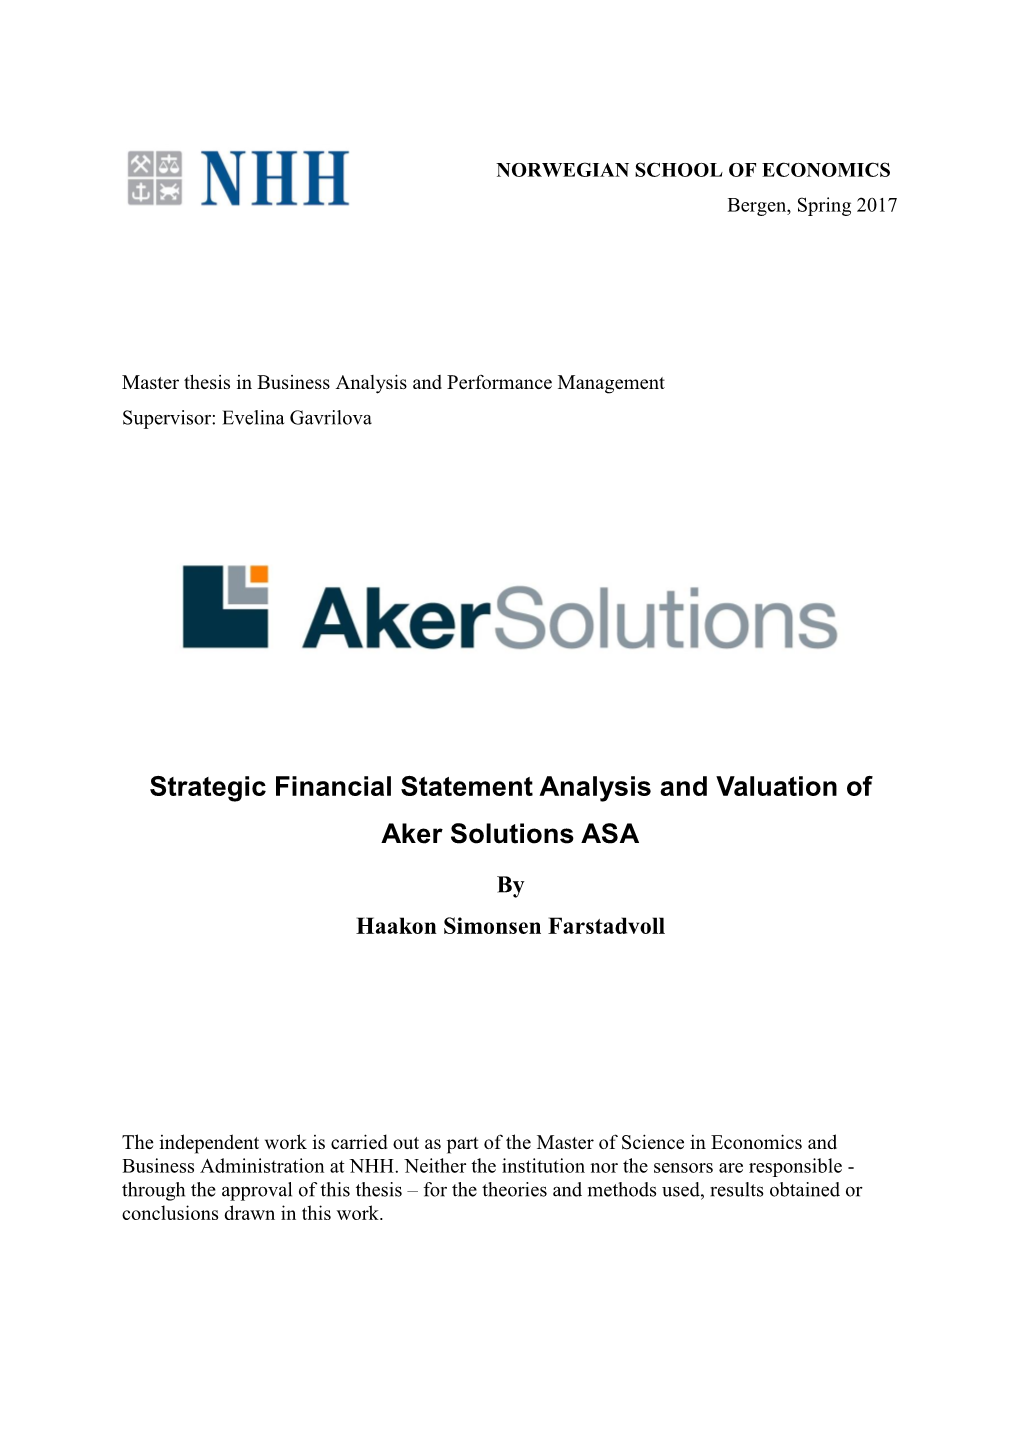 Strategic Financial Statement Analysis and Valuation of Aker Solutions ASA